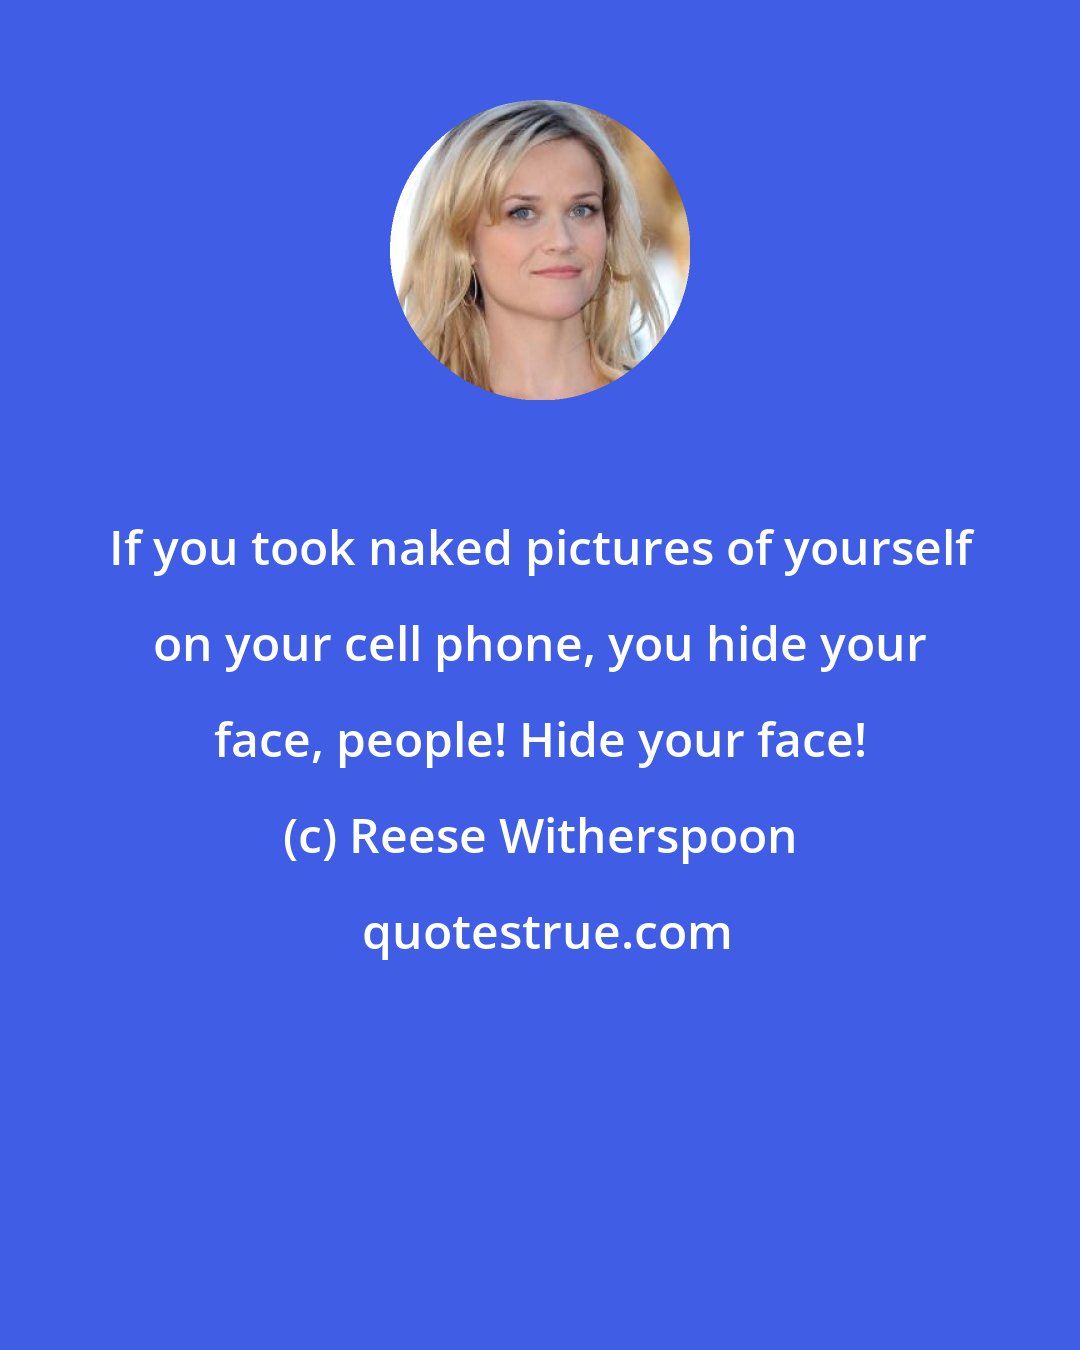 Reese Witherspoon: If you took naked pictures of yourself on your cell phone, you hide your face, people! Hide your face!